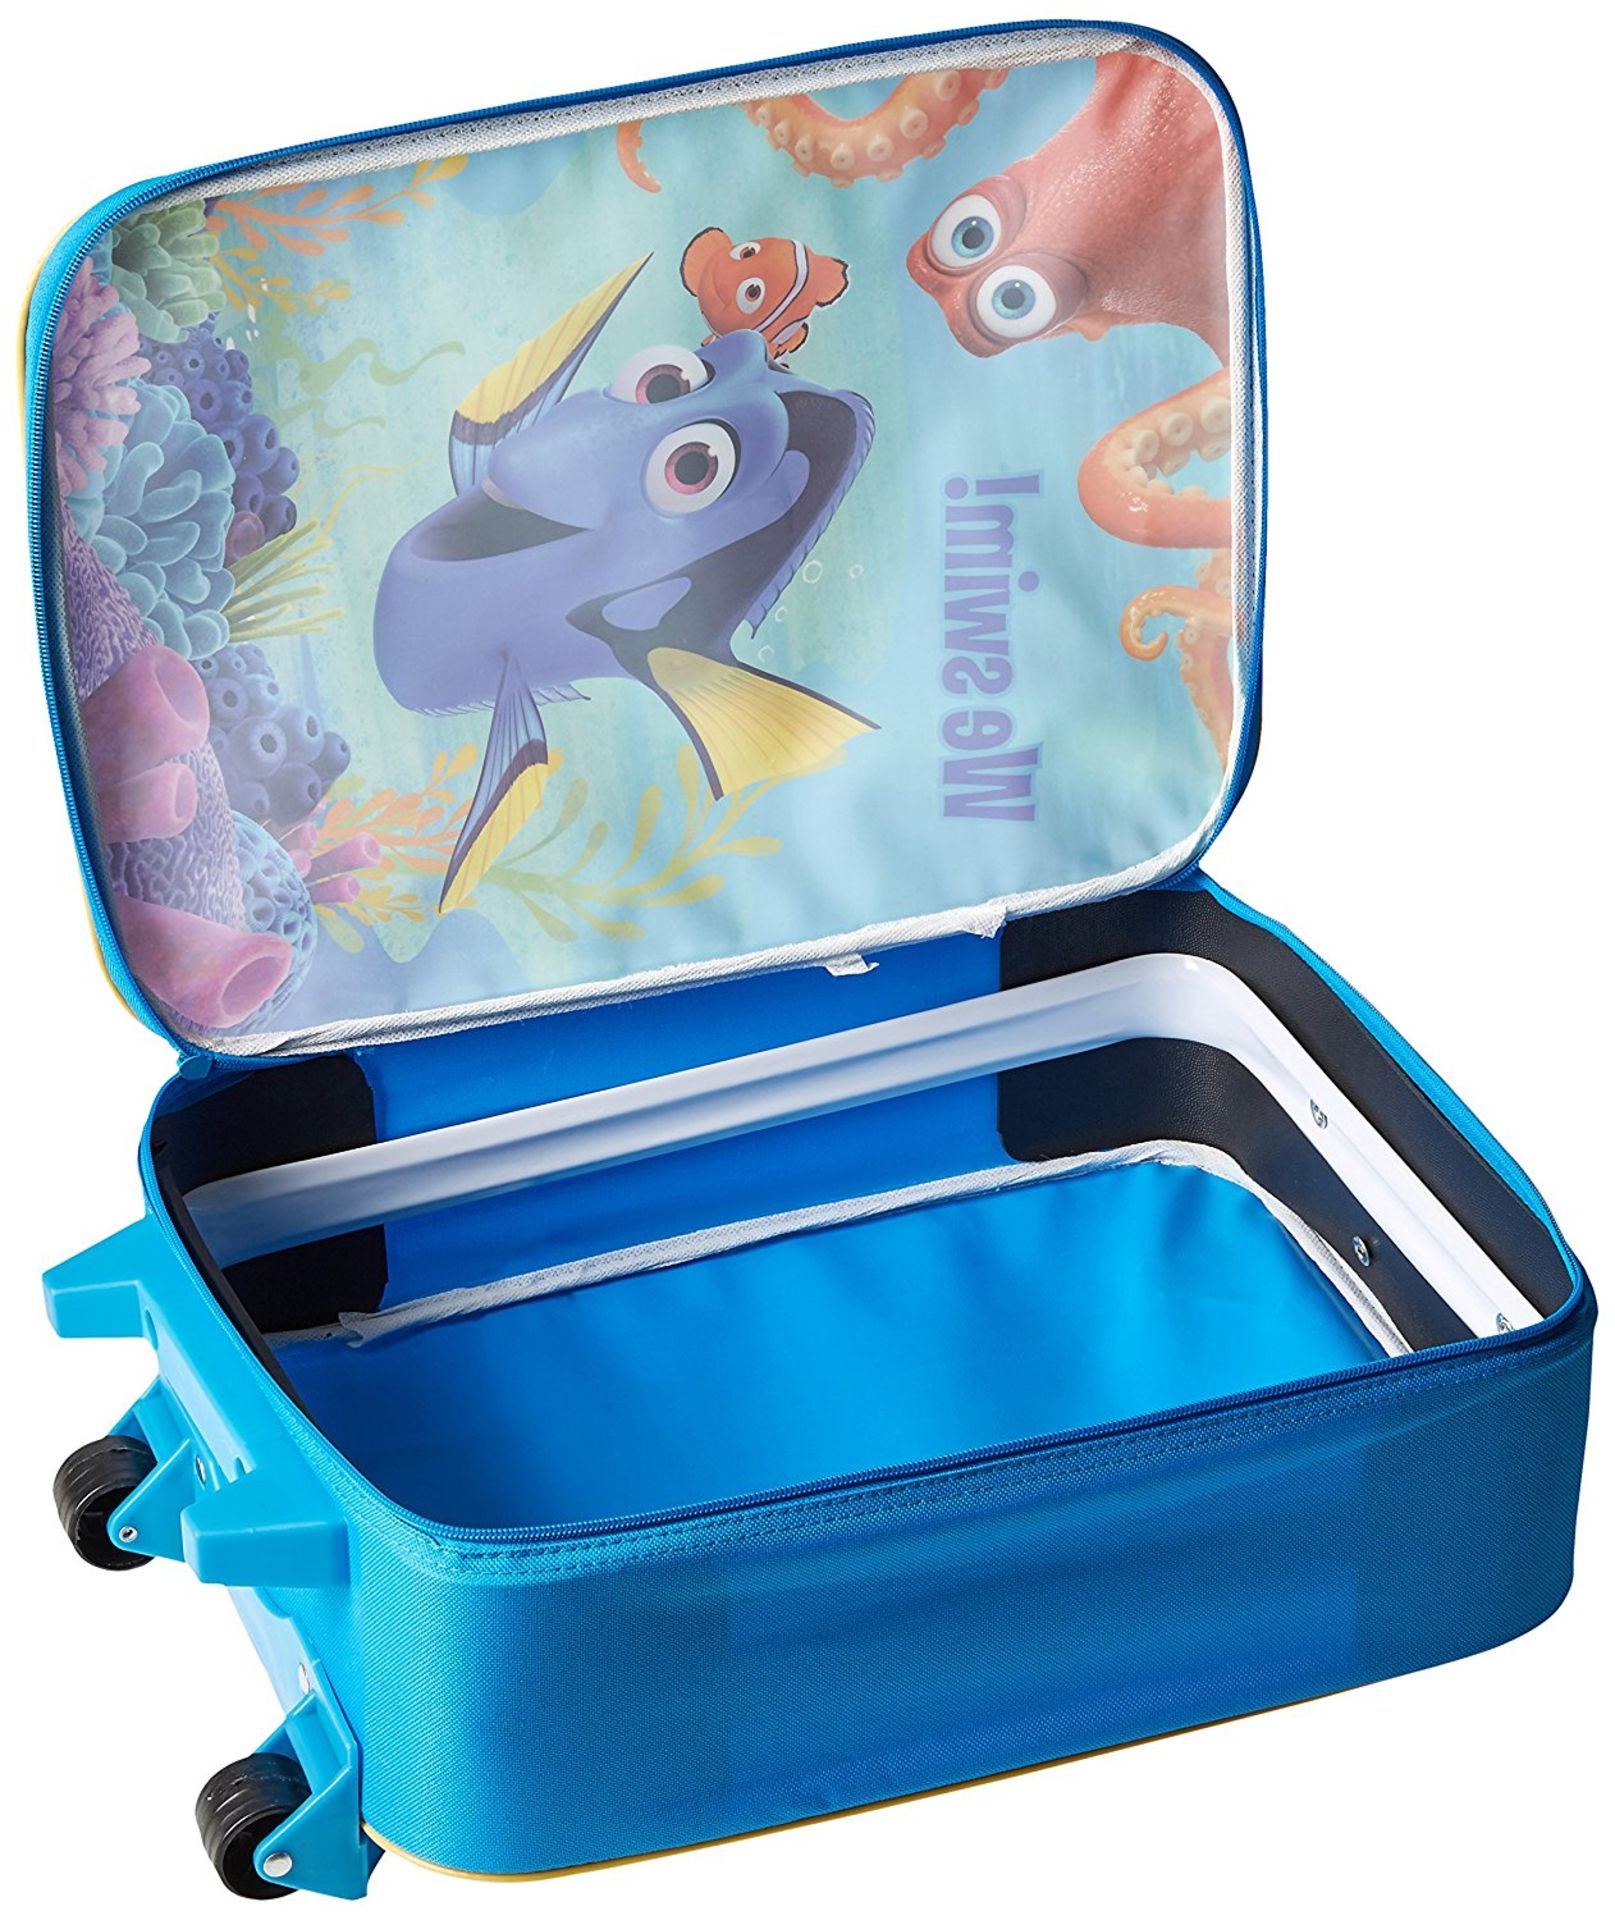 72 X Disney Finding Dory 3Pce Travel Trolley Luggage Set [Brand New In Retail Packaging] - Image 5 of 6